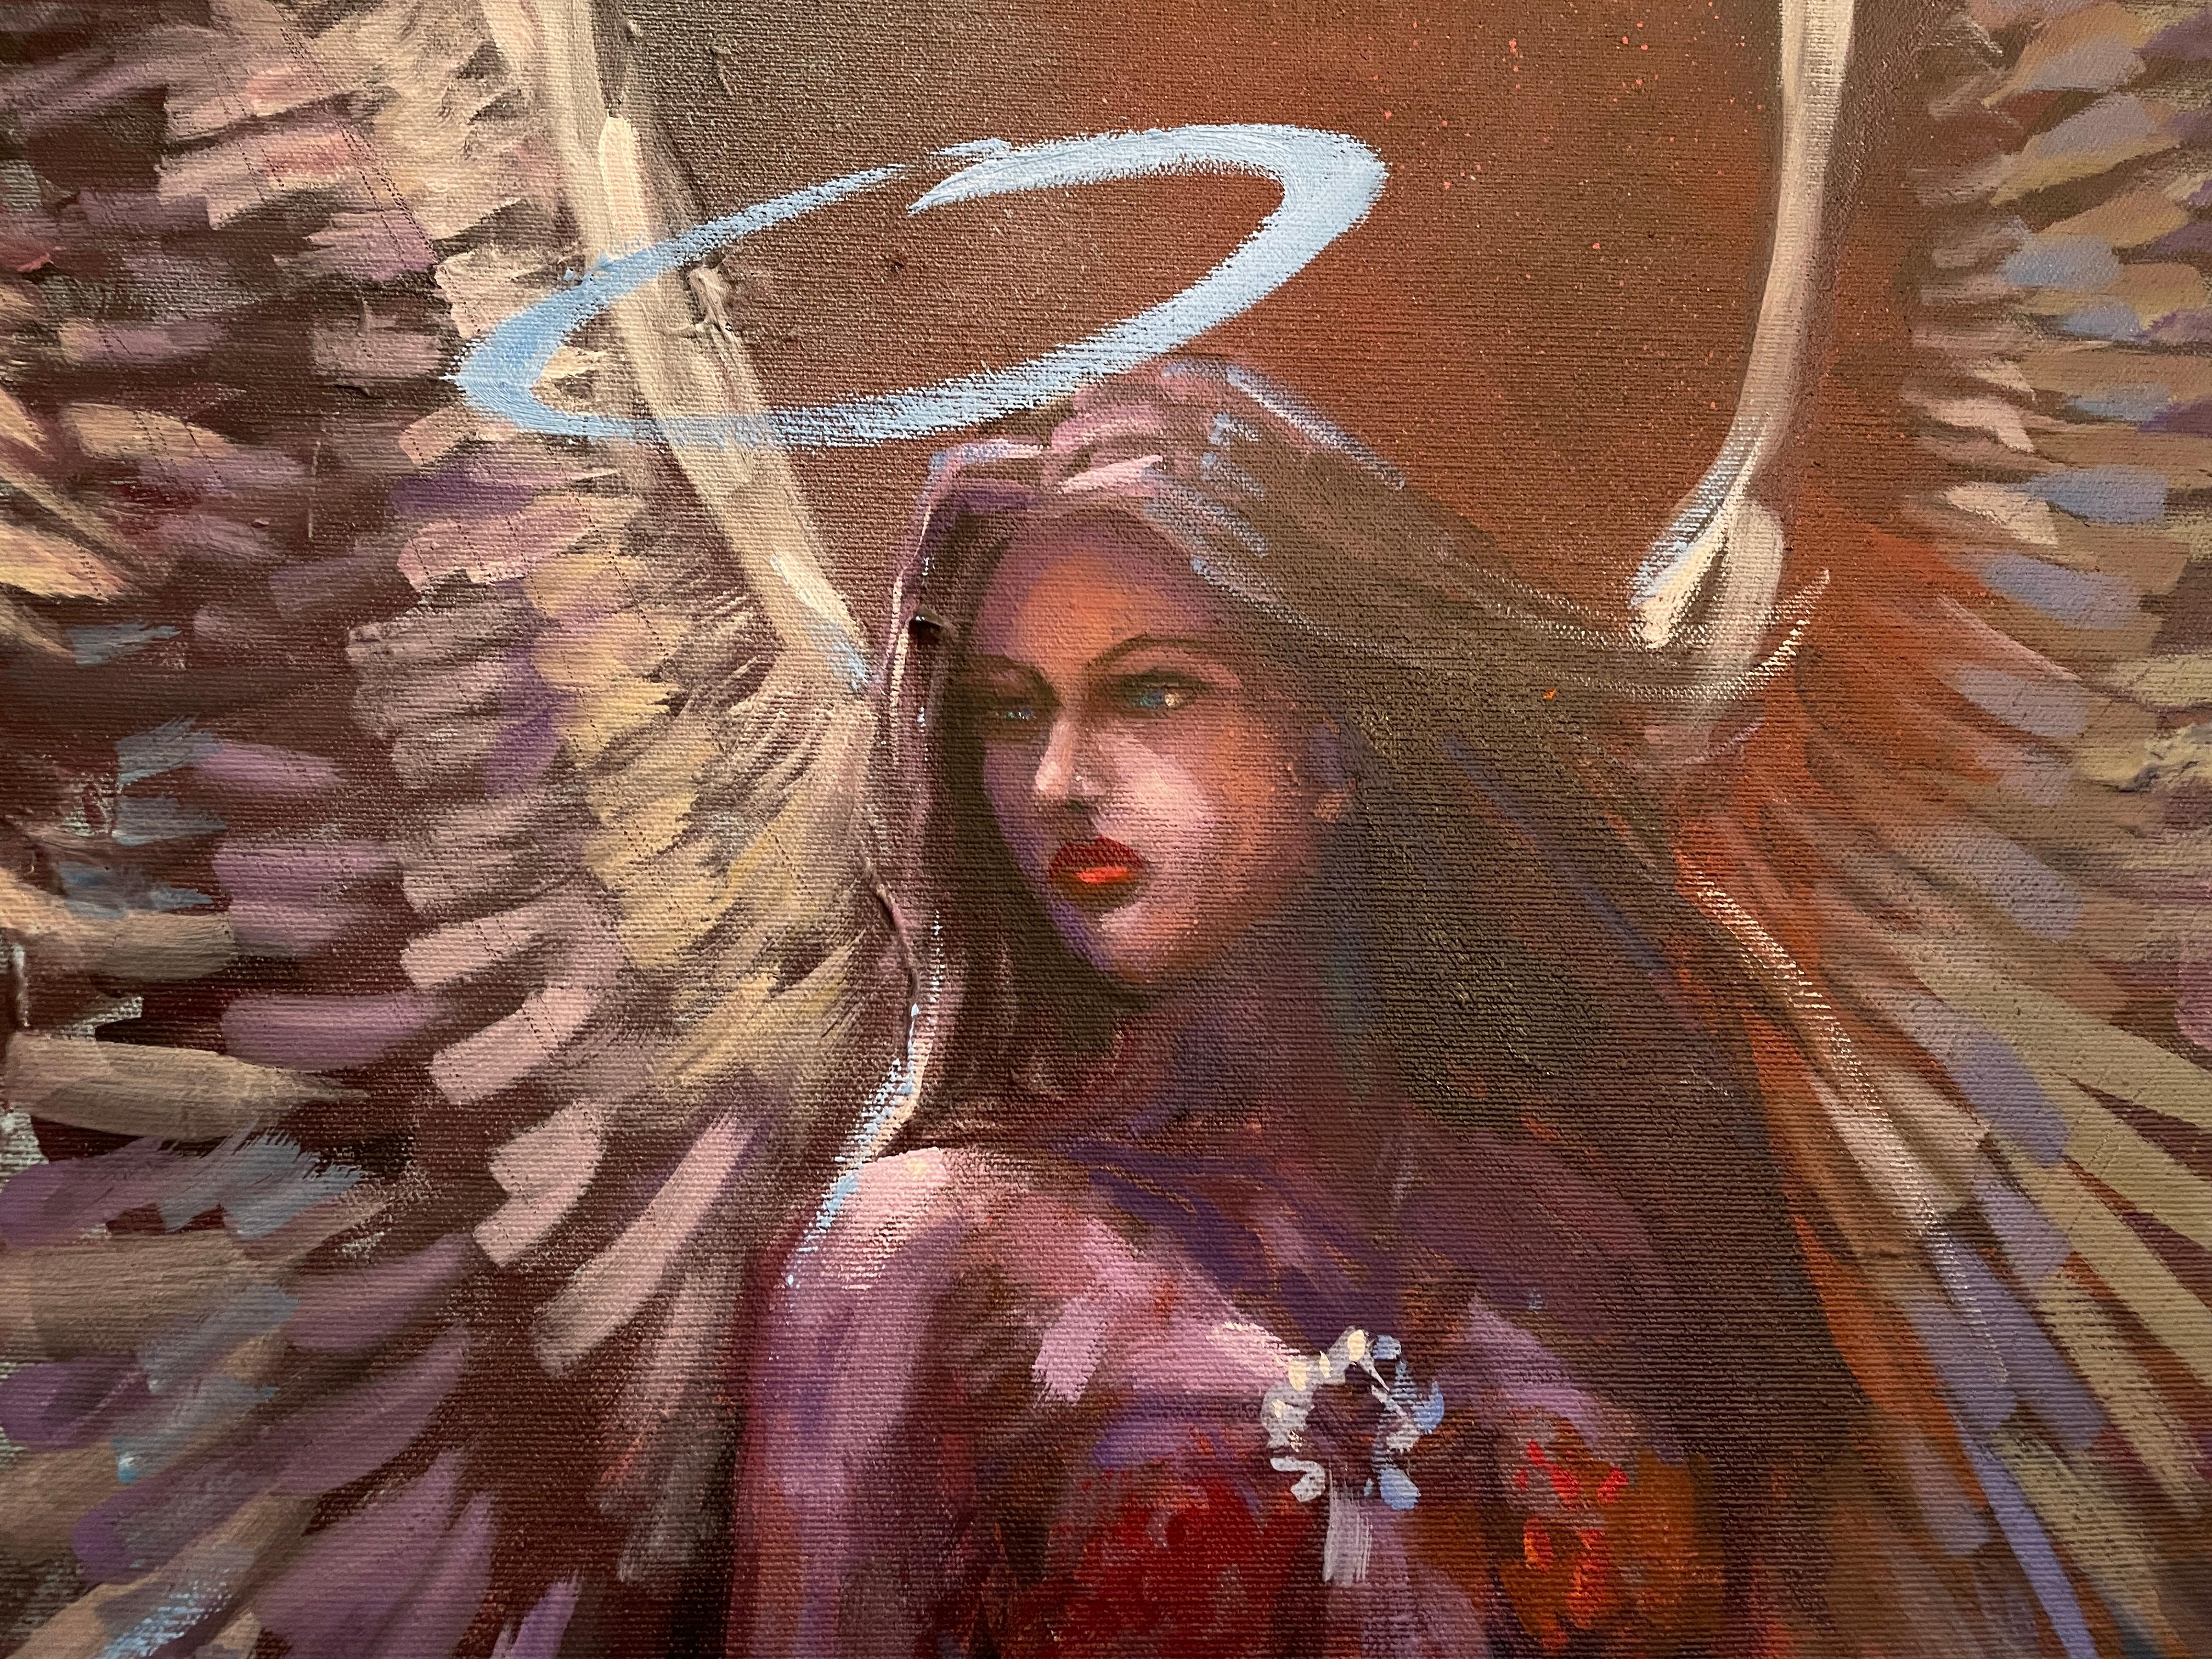 who painted the fallen angel painting